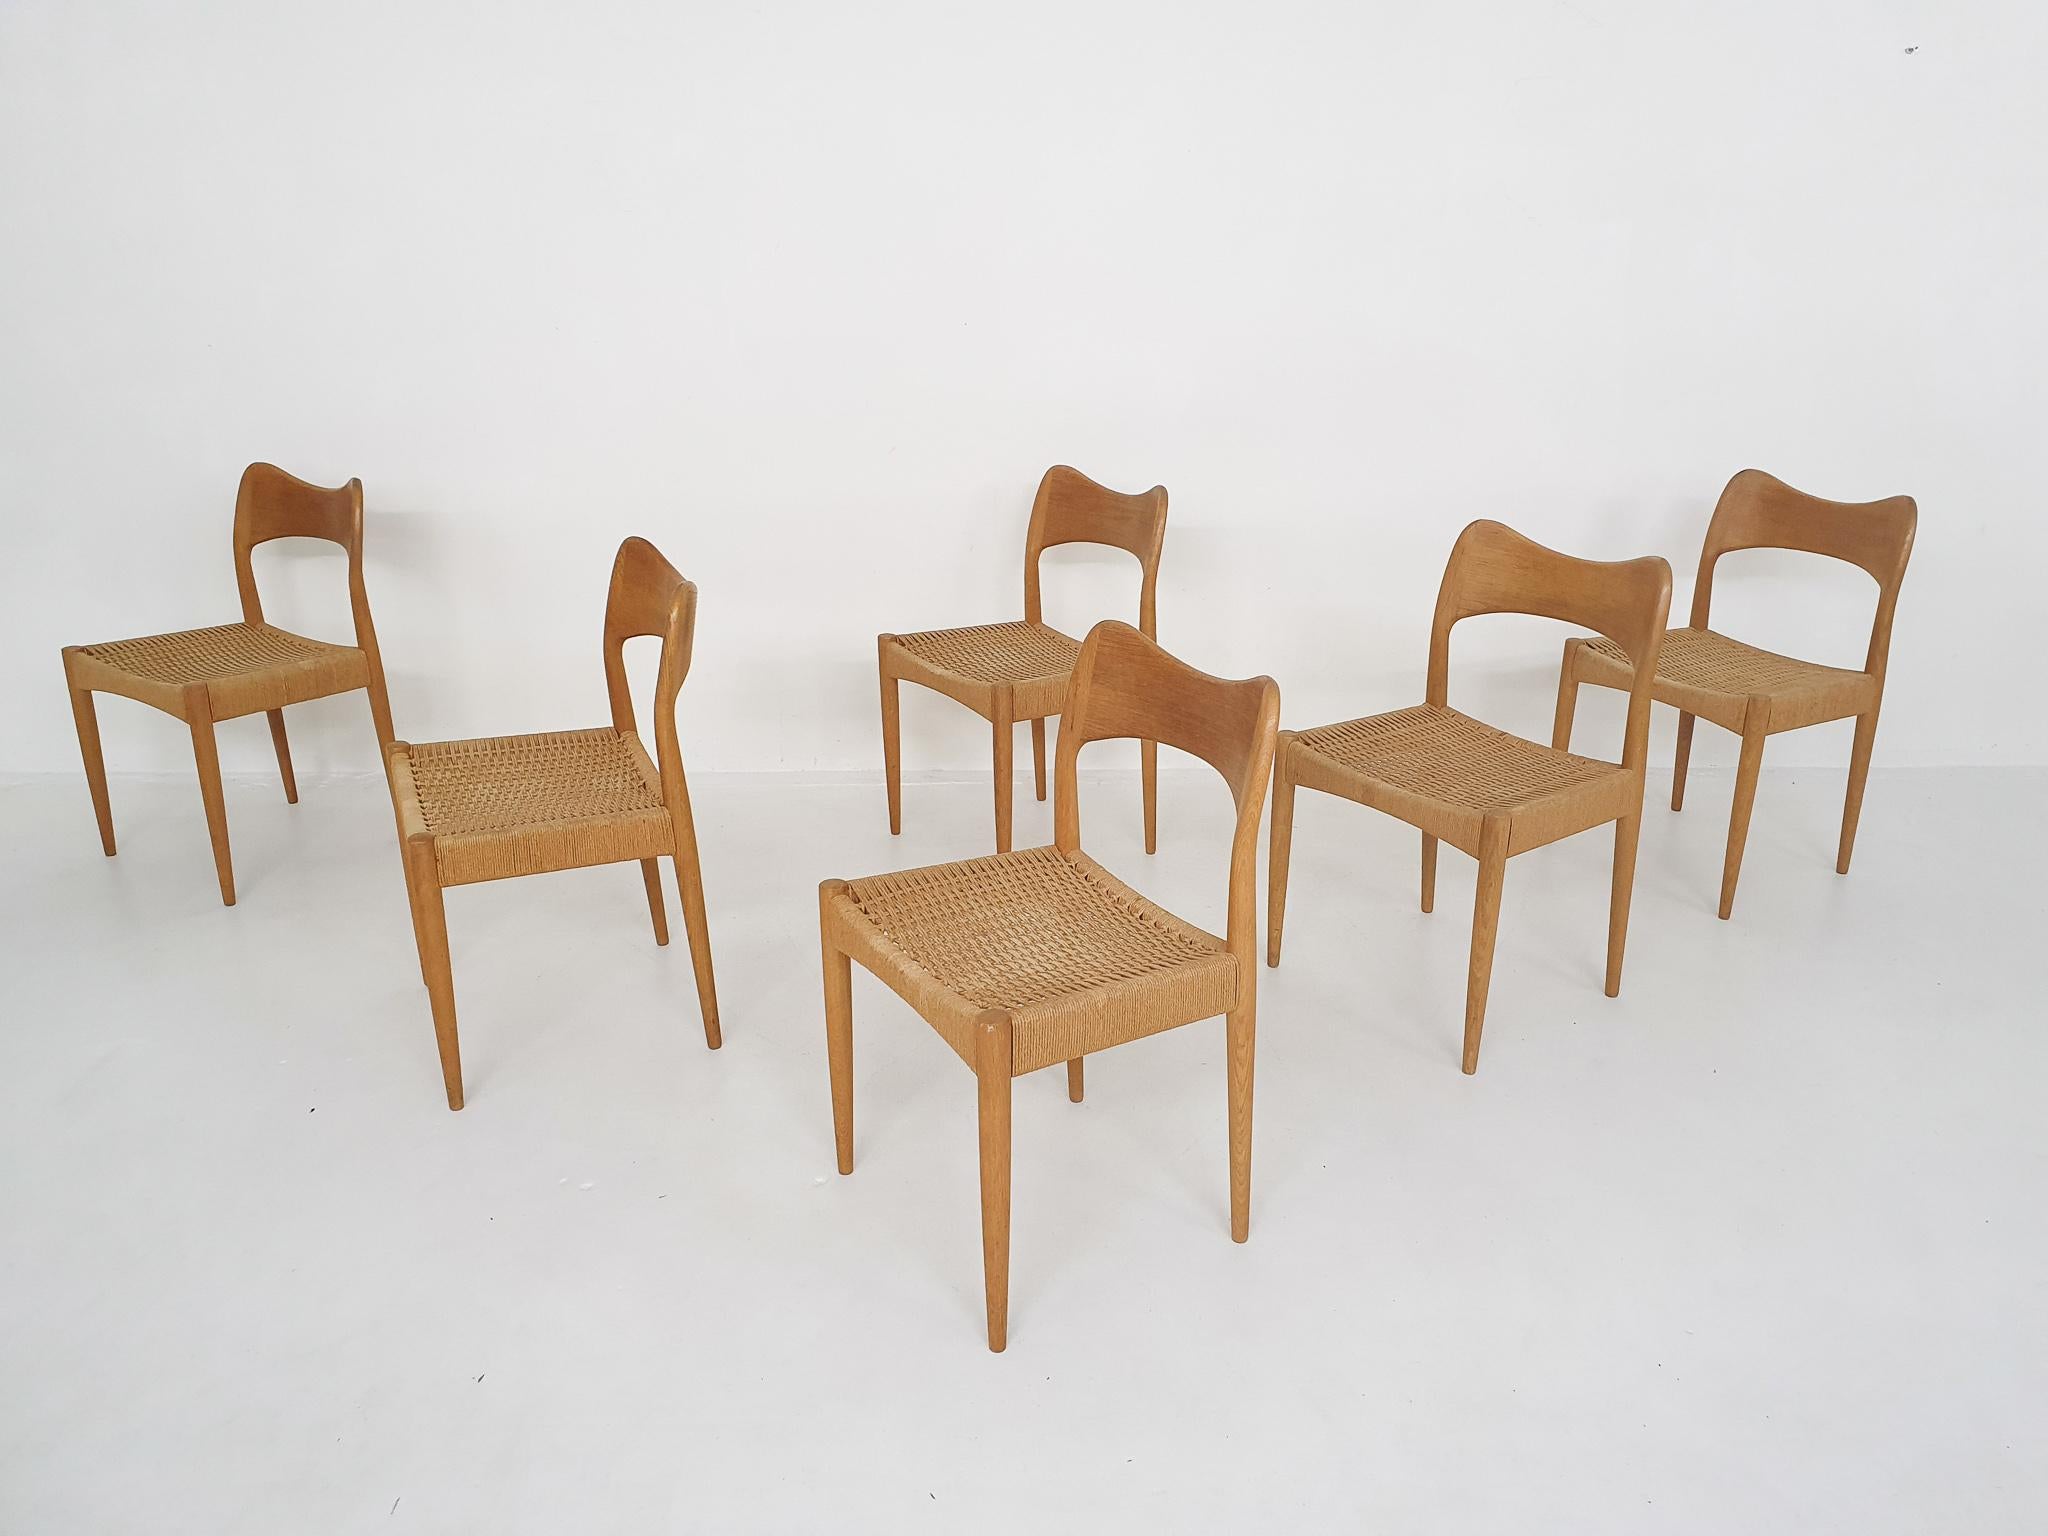 Oak dining chairs with papercord seating In good condition.
Arne Hovmand-Olsen was a Danish furniture designer. Arne Hovmand-Olsen was born in 1919 in Denmark and started his career in 1938 as a cabinetmaker for P.Olsen Sibast. He studied in a